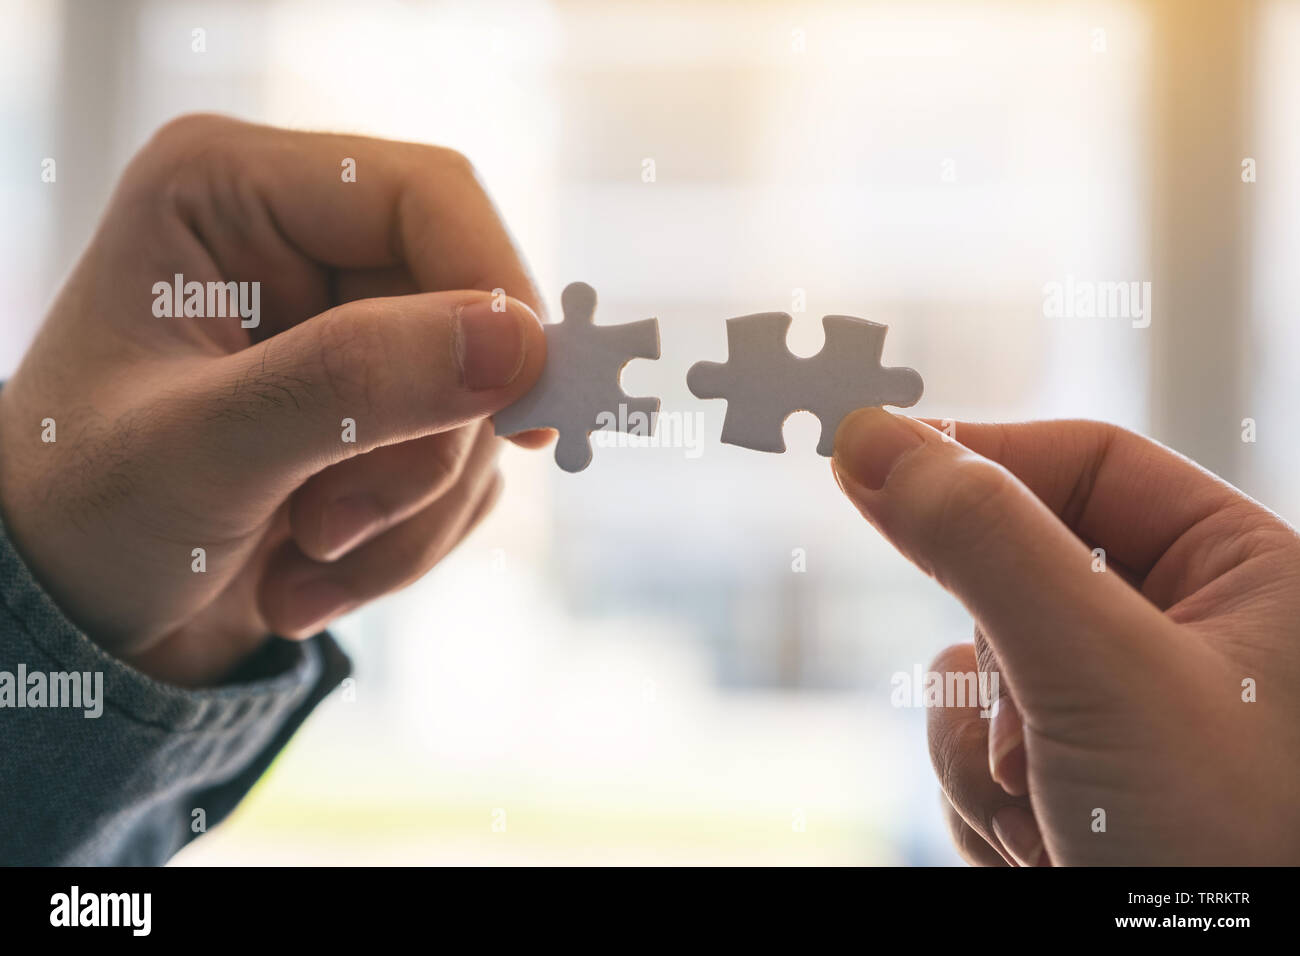 Closeup image of two hands holding and putting a piece of white jigsaw puzzle together Stock Photo